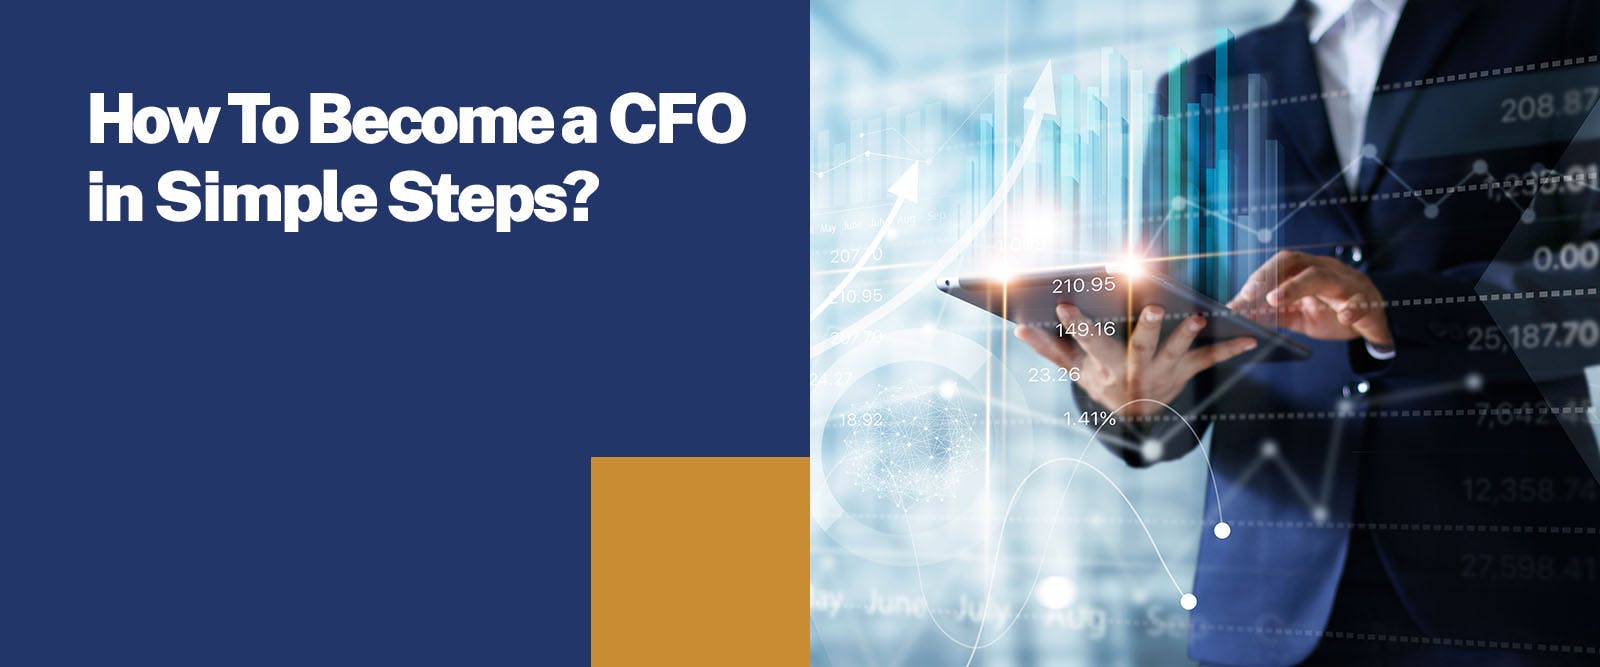 How To Become a CFO in Simple Steps?